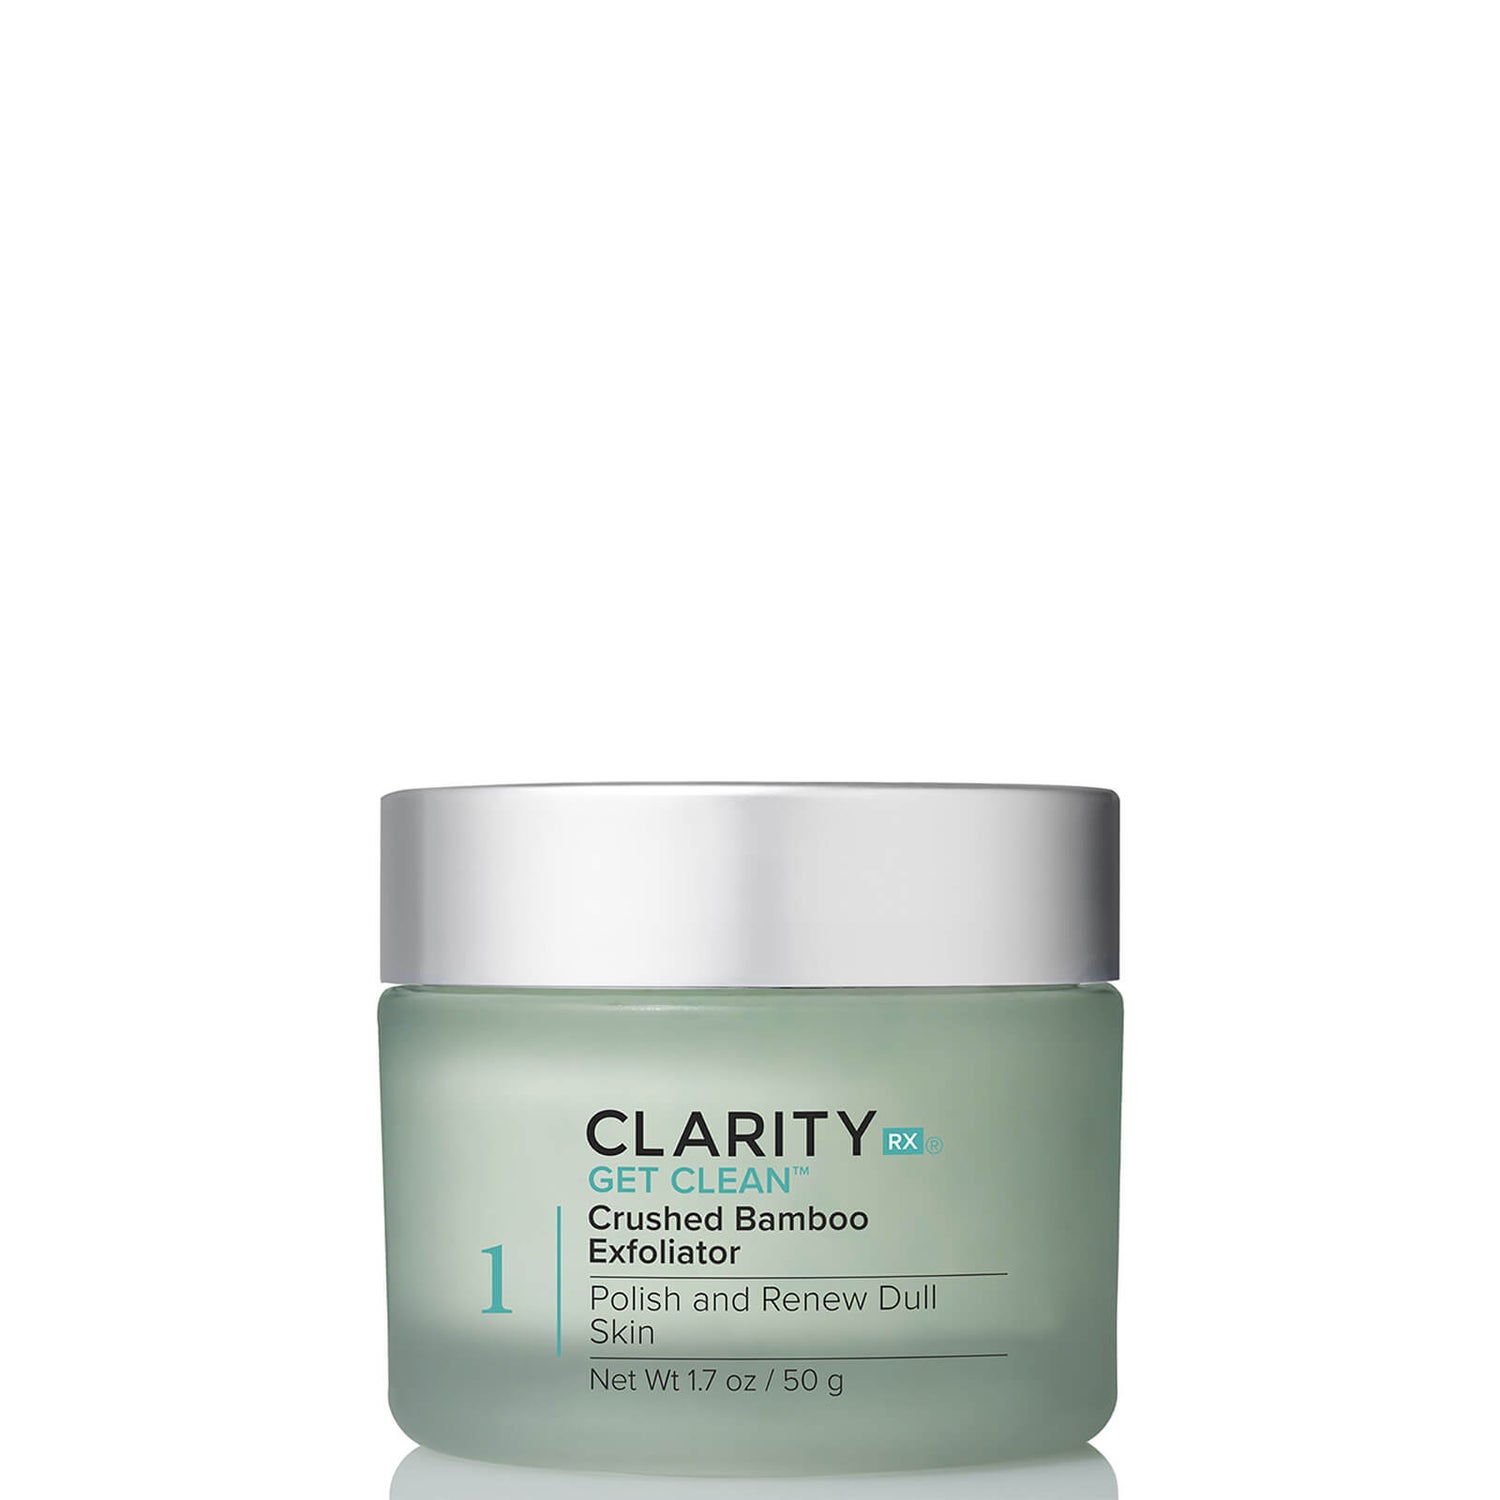 ClarityRx Get Clean Crushed Bamboo Exfoliator 1.7 oz.